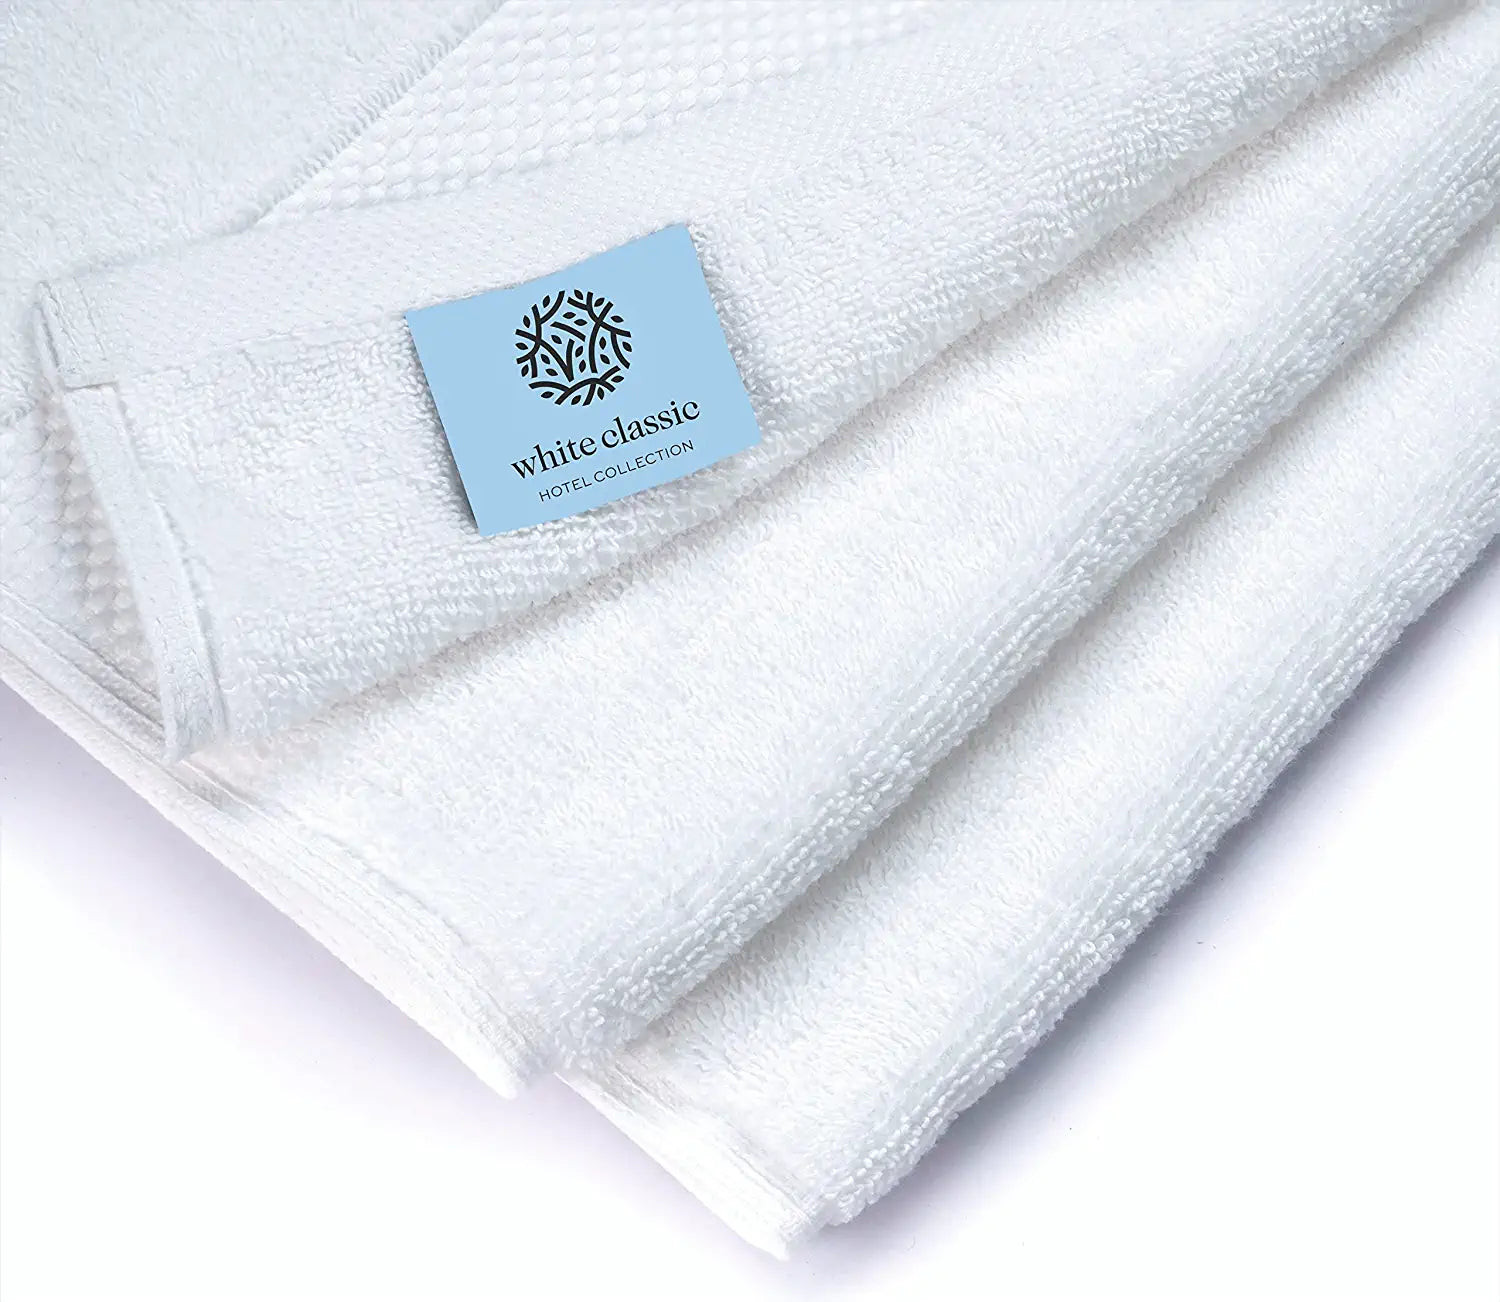 Texrise Premium Collection Laguna Series Luxury Hand Towels 16 x 30 Inches 12 Pack, White